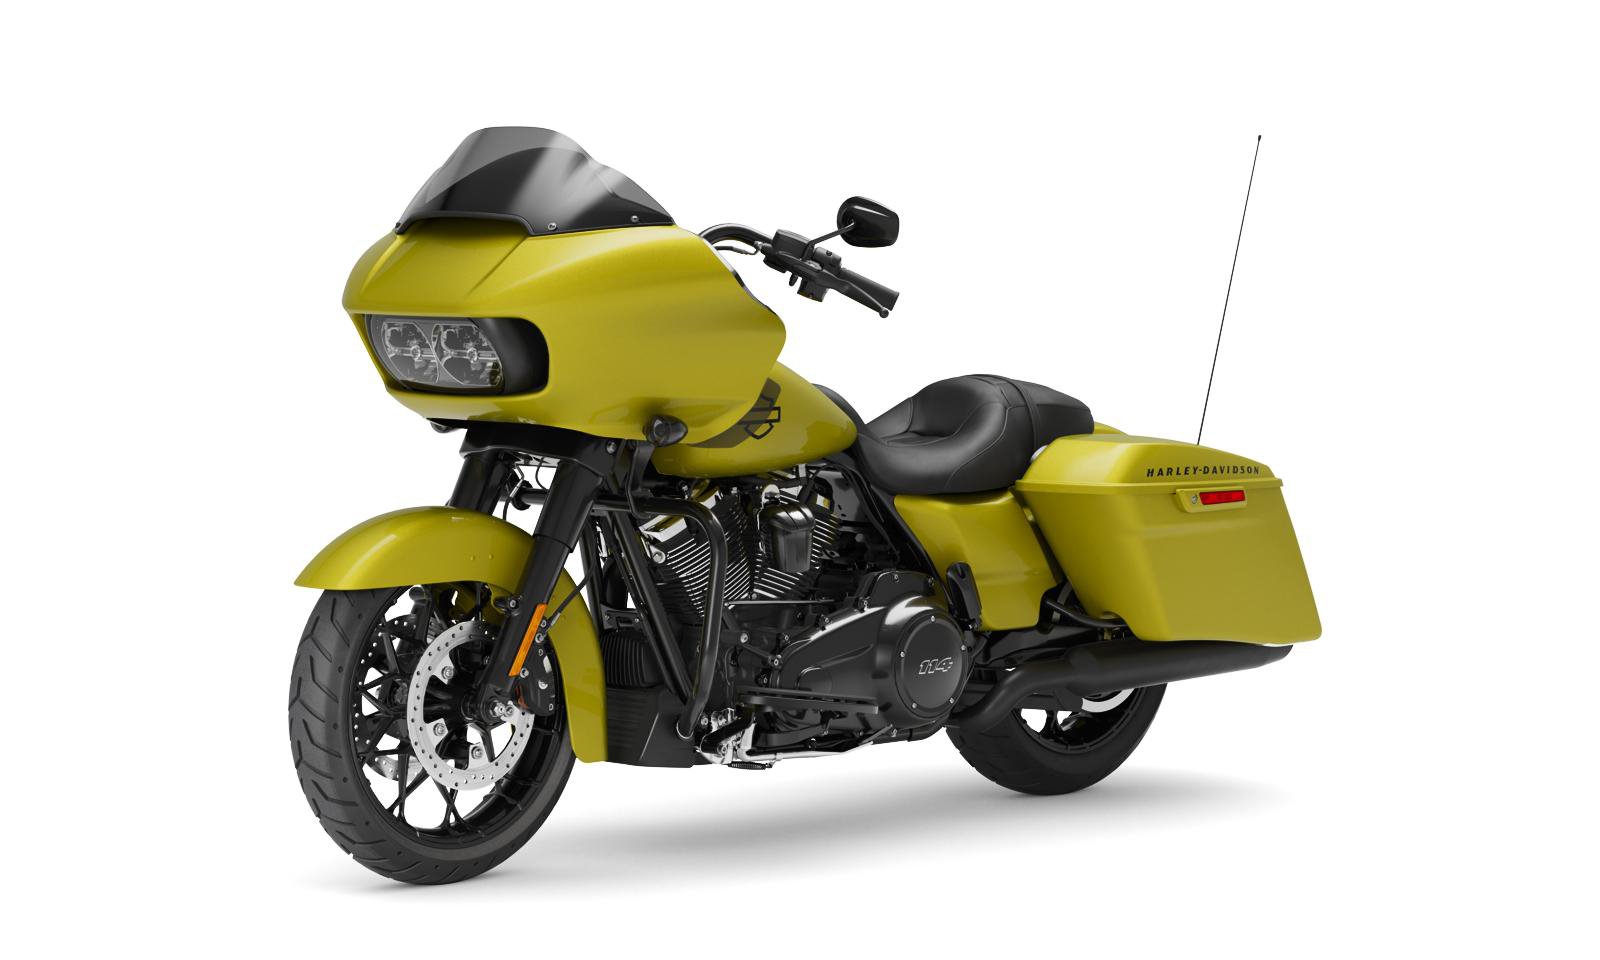 2020 Road Glide Special Motorcycle Harley Davidson United States